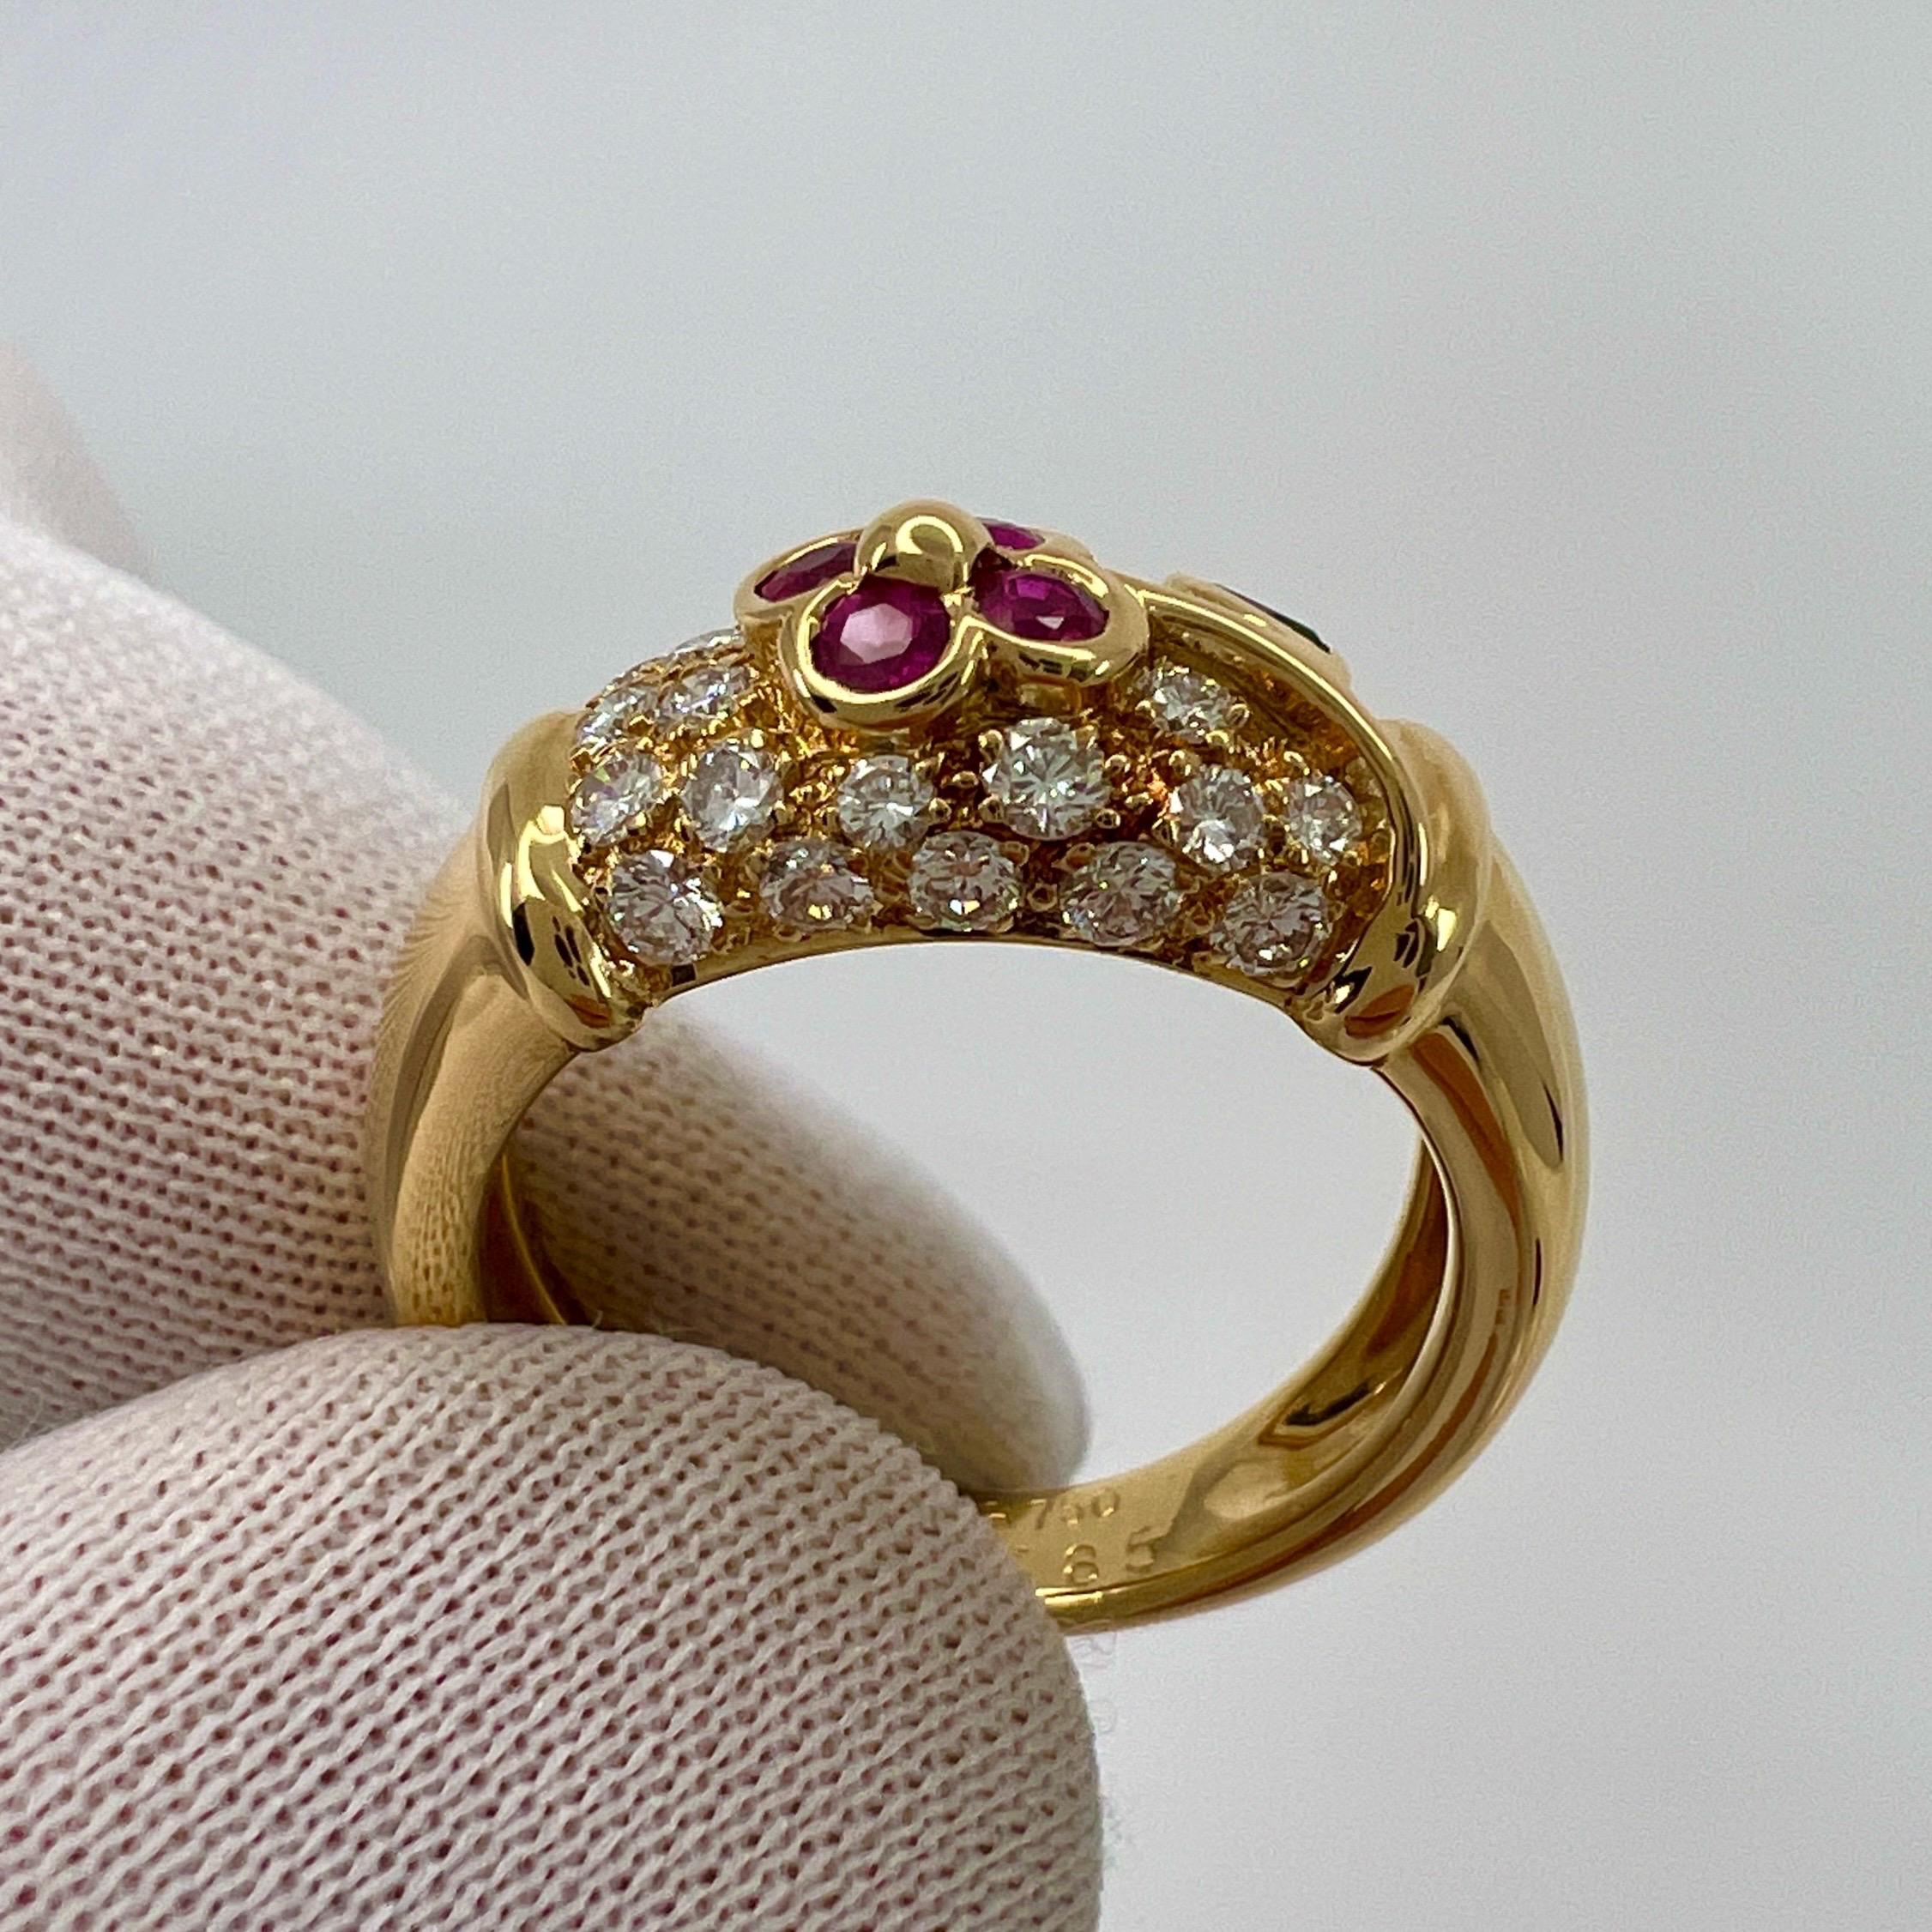 Rare Van Cleef & Arpels Ruby Emerald Diamond 18k Yellow Gold Floral Flower Ring For Sale 1